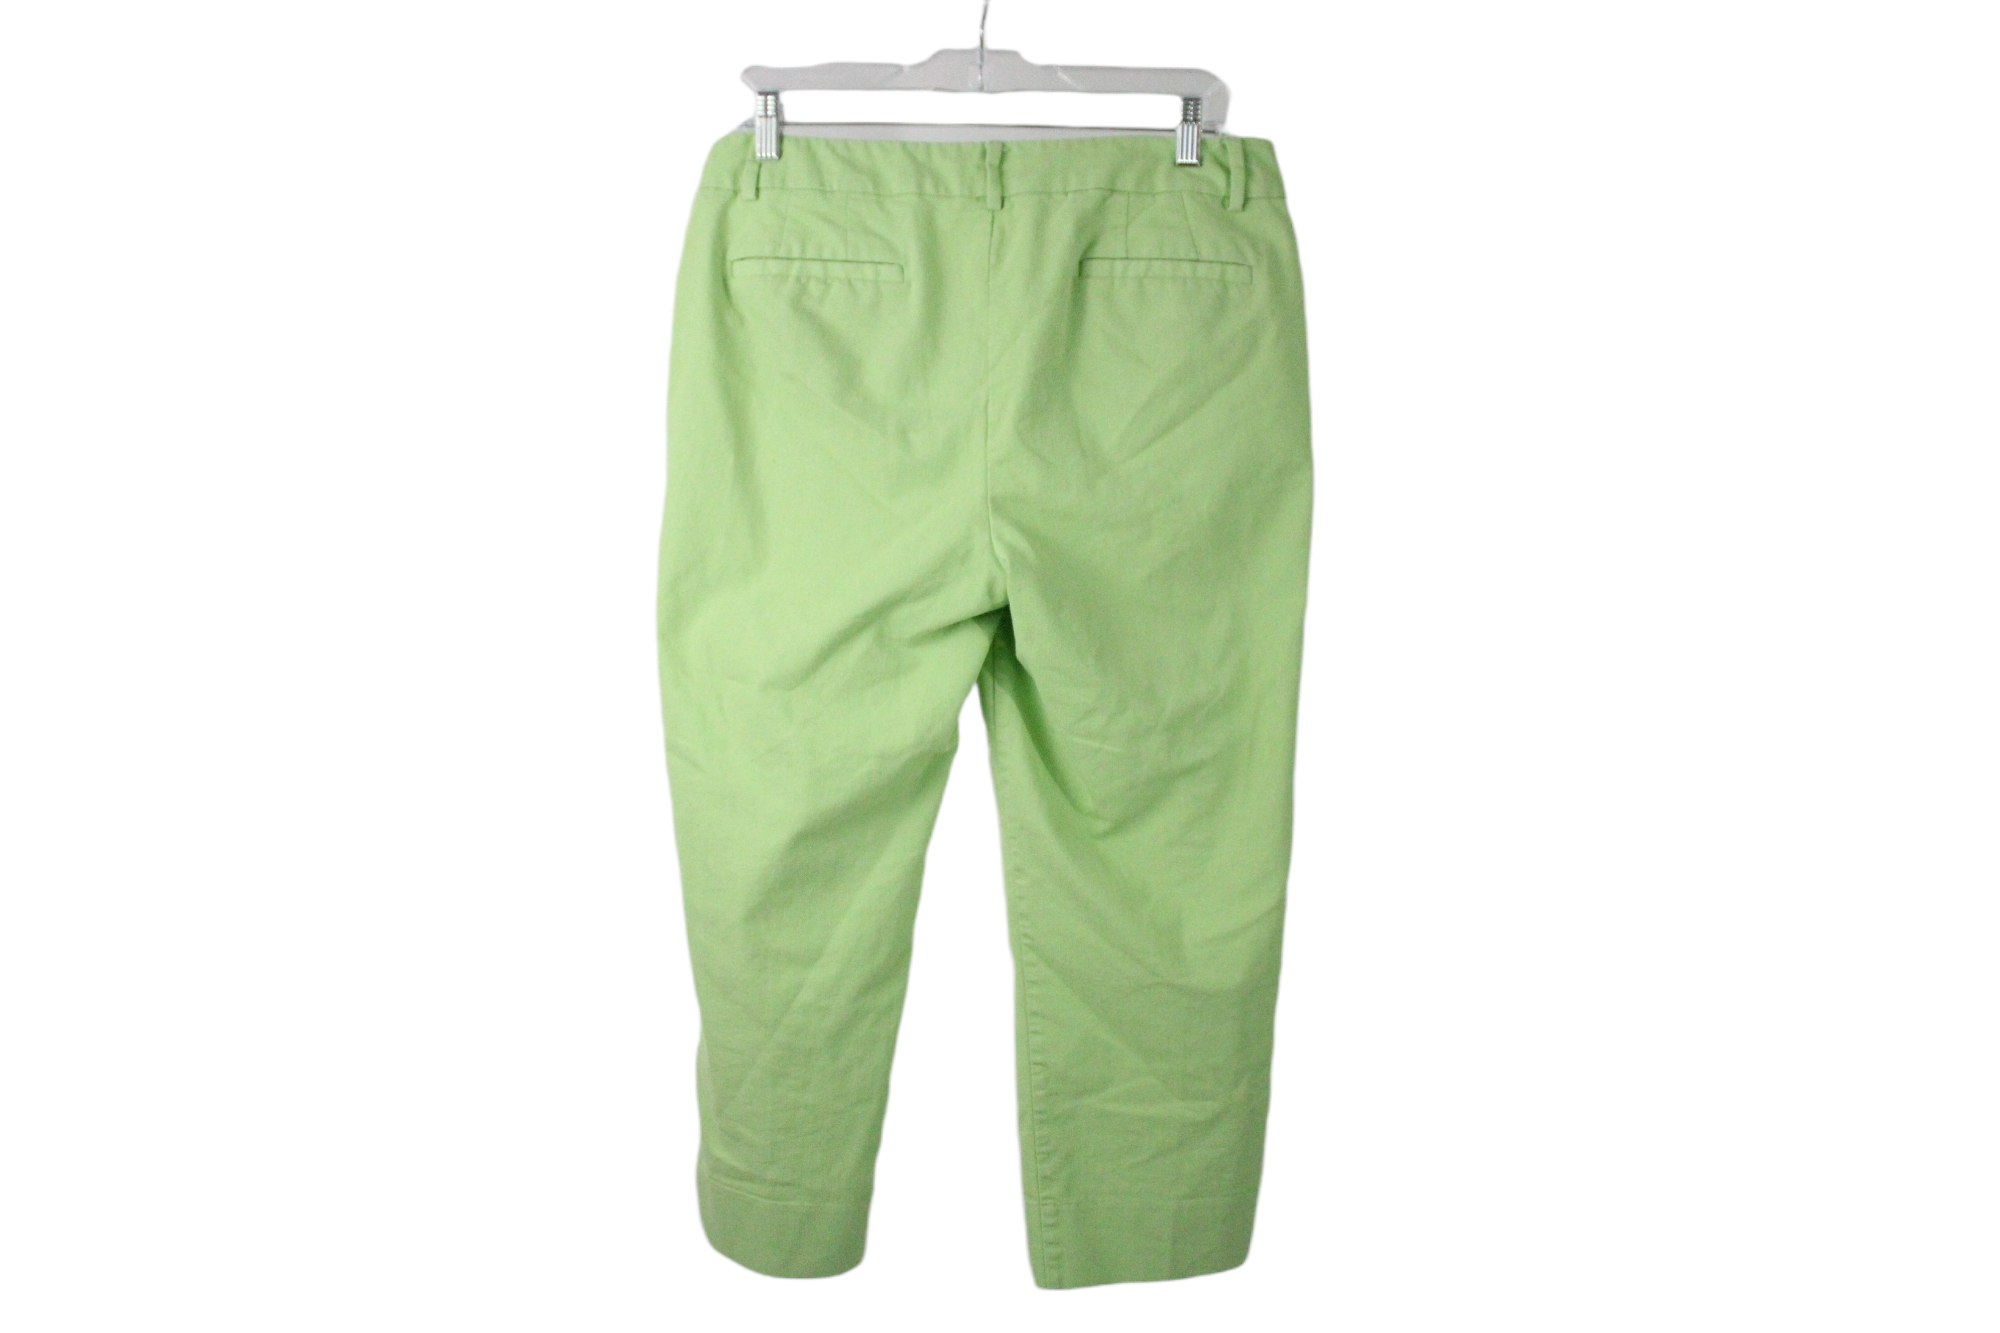 Chico's Lime Green Ankle Pant | 1.5 (M/10)